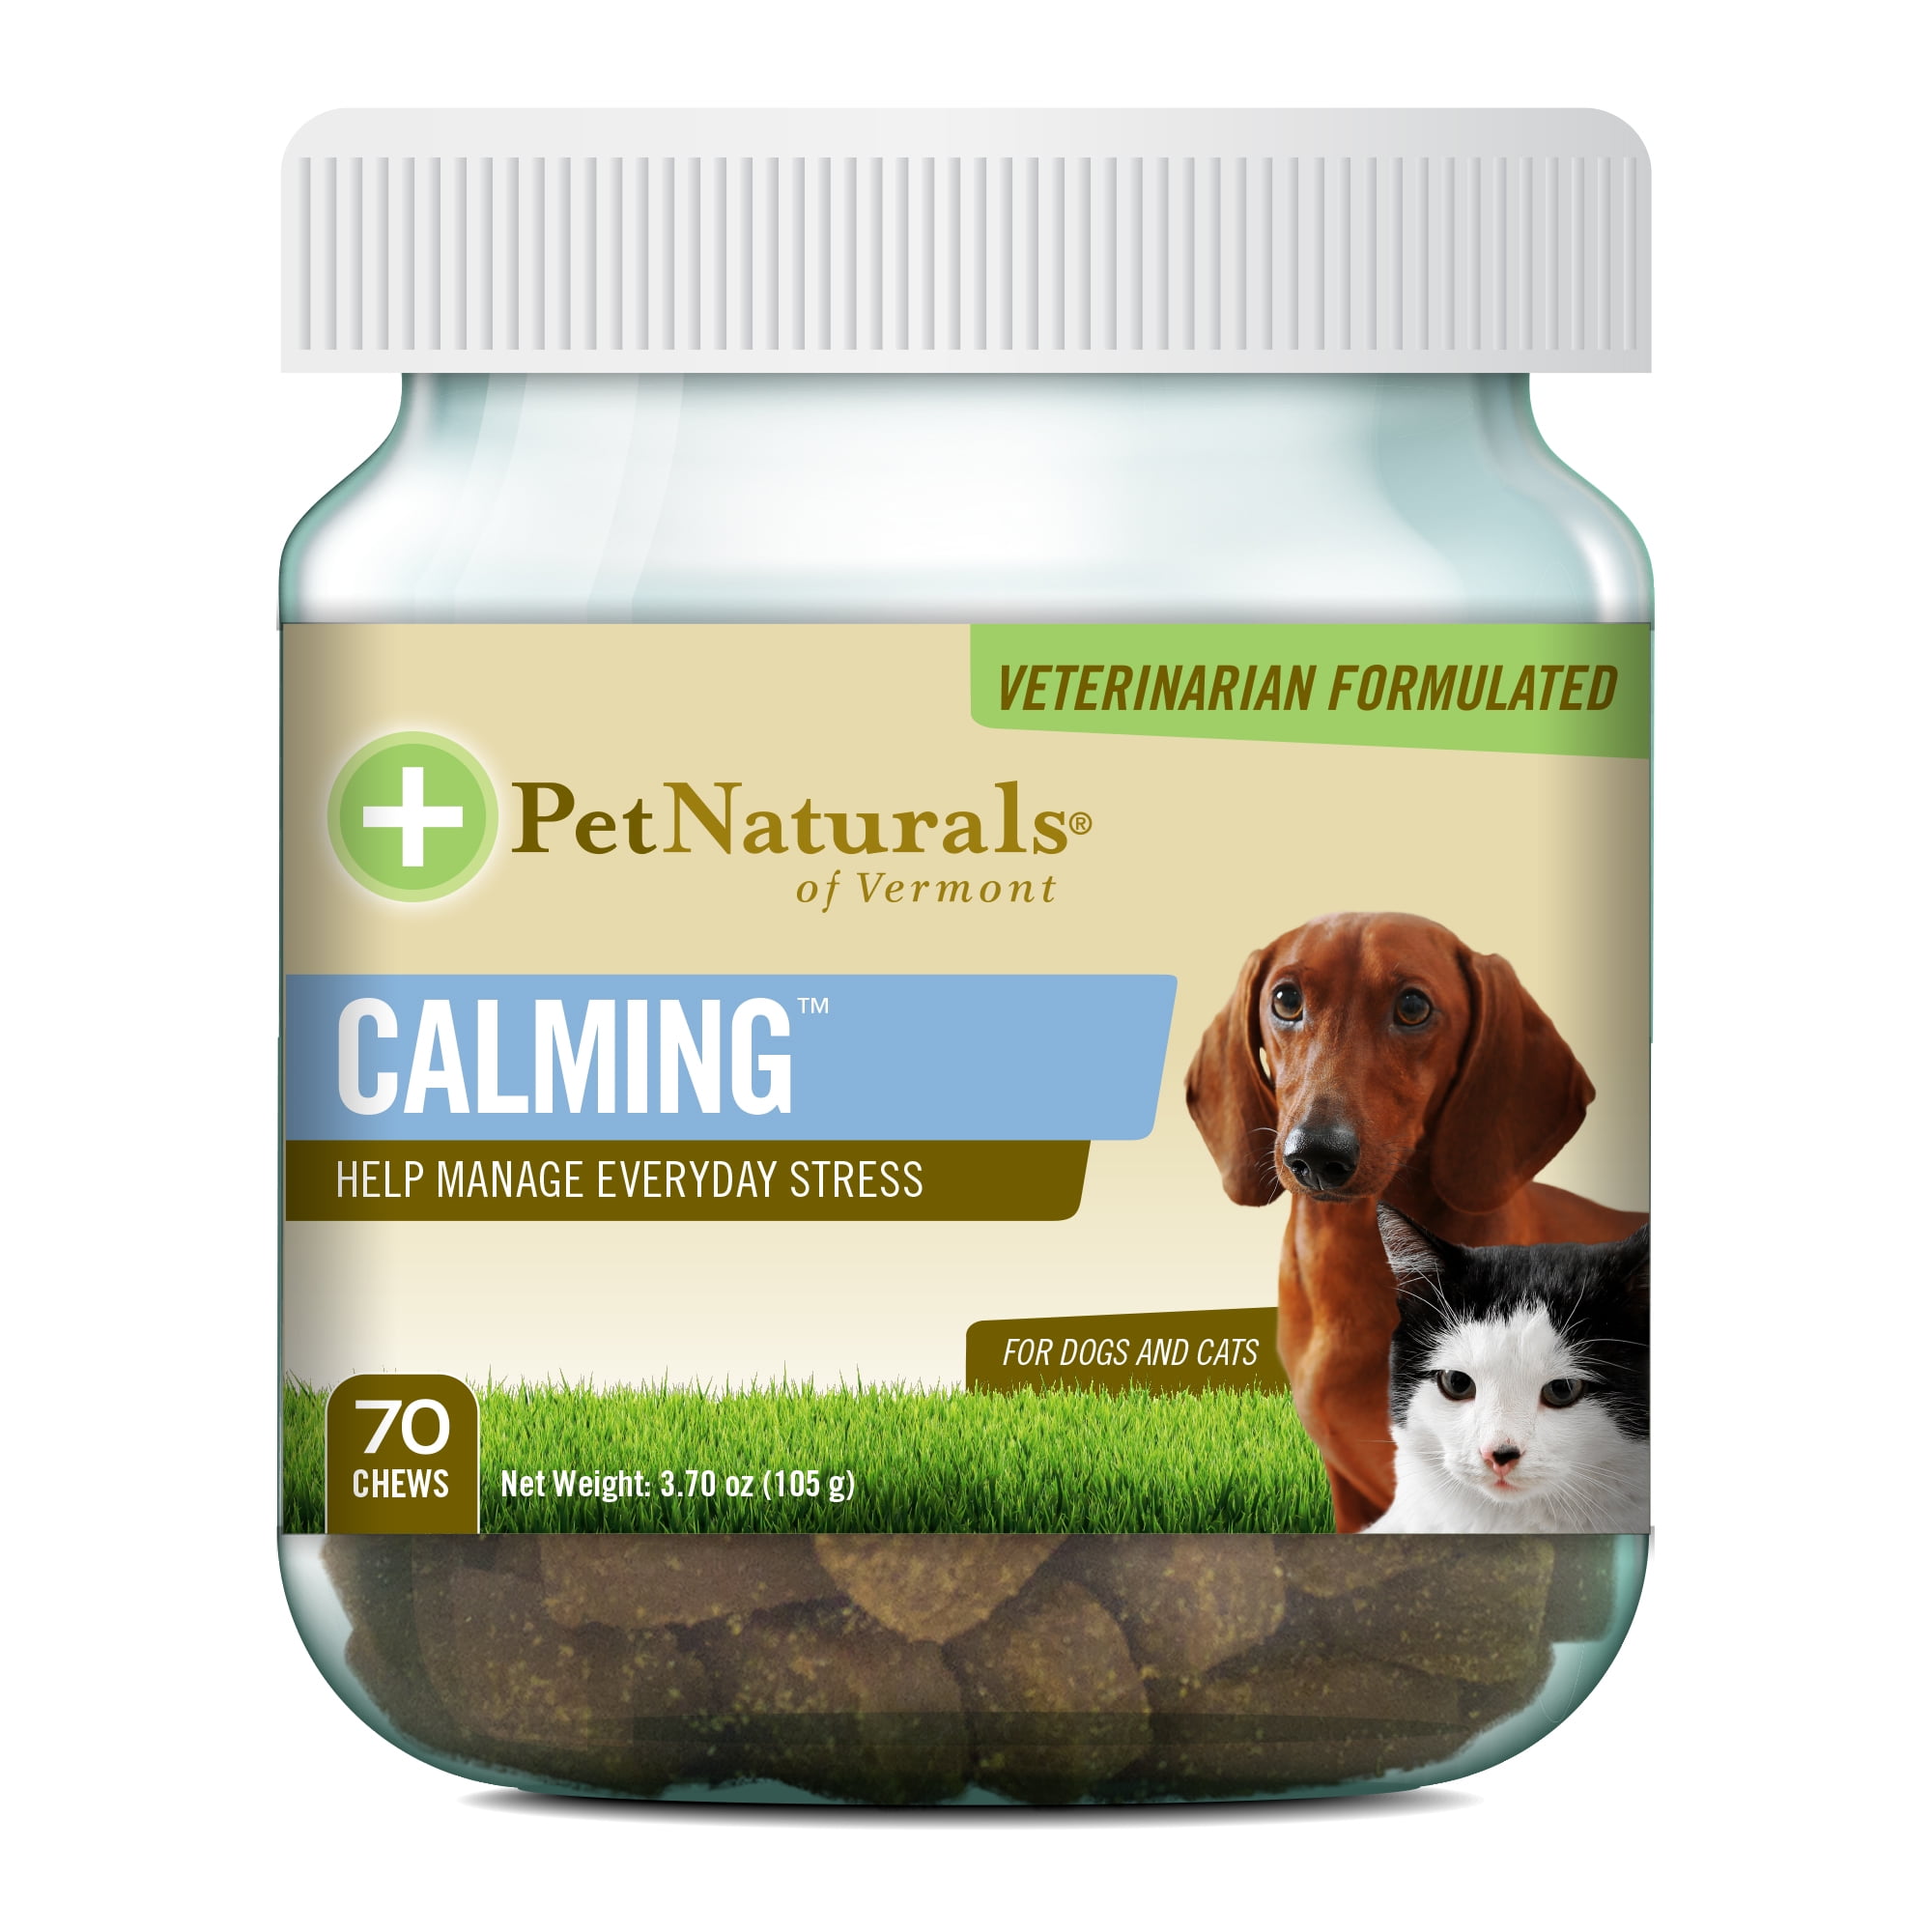 Pet Naturals of Vermont Calming for Dogs and Cats, Behavior Support